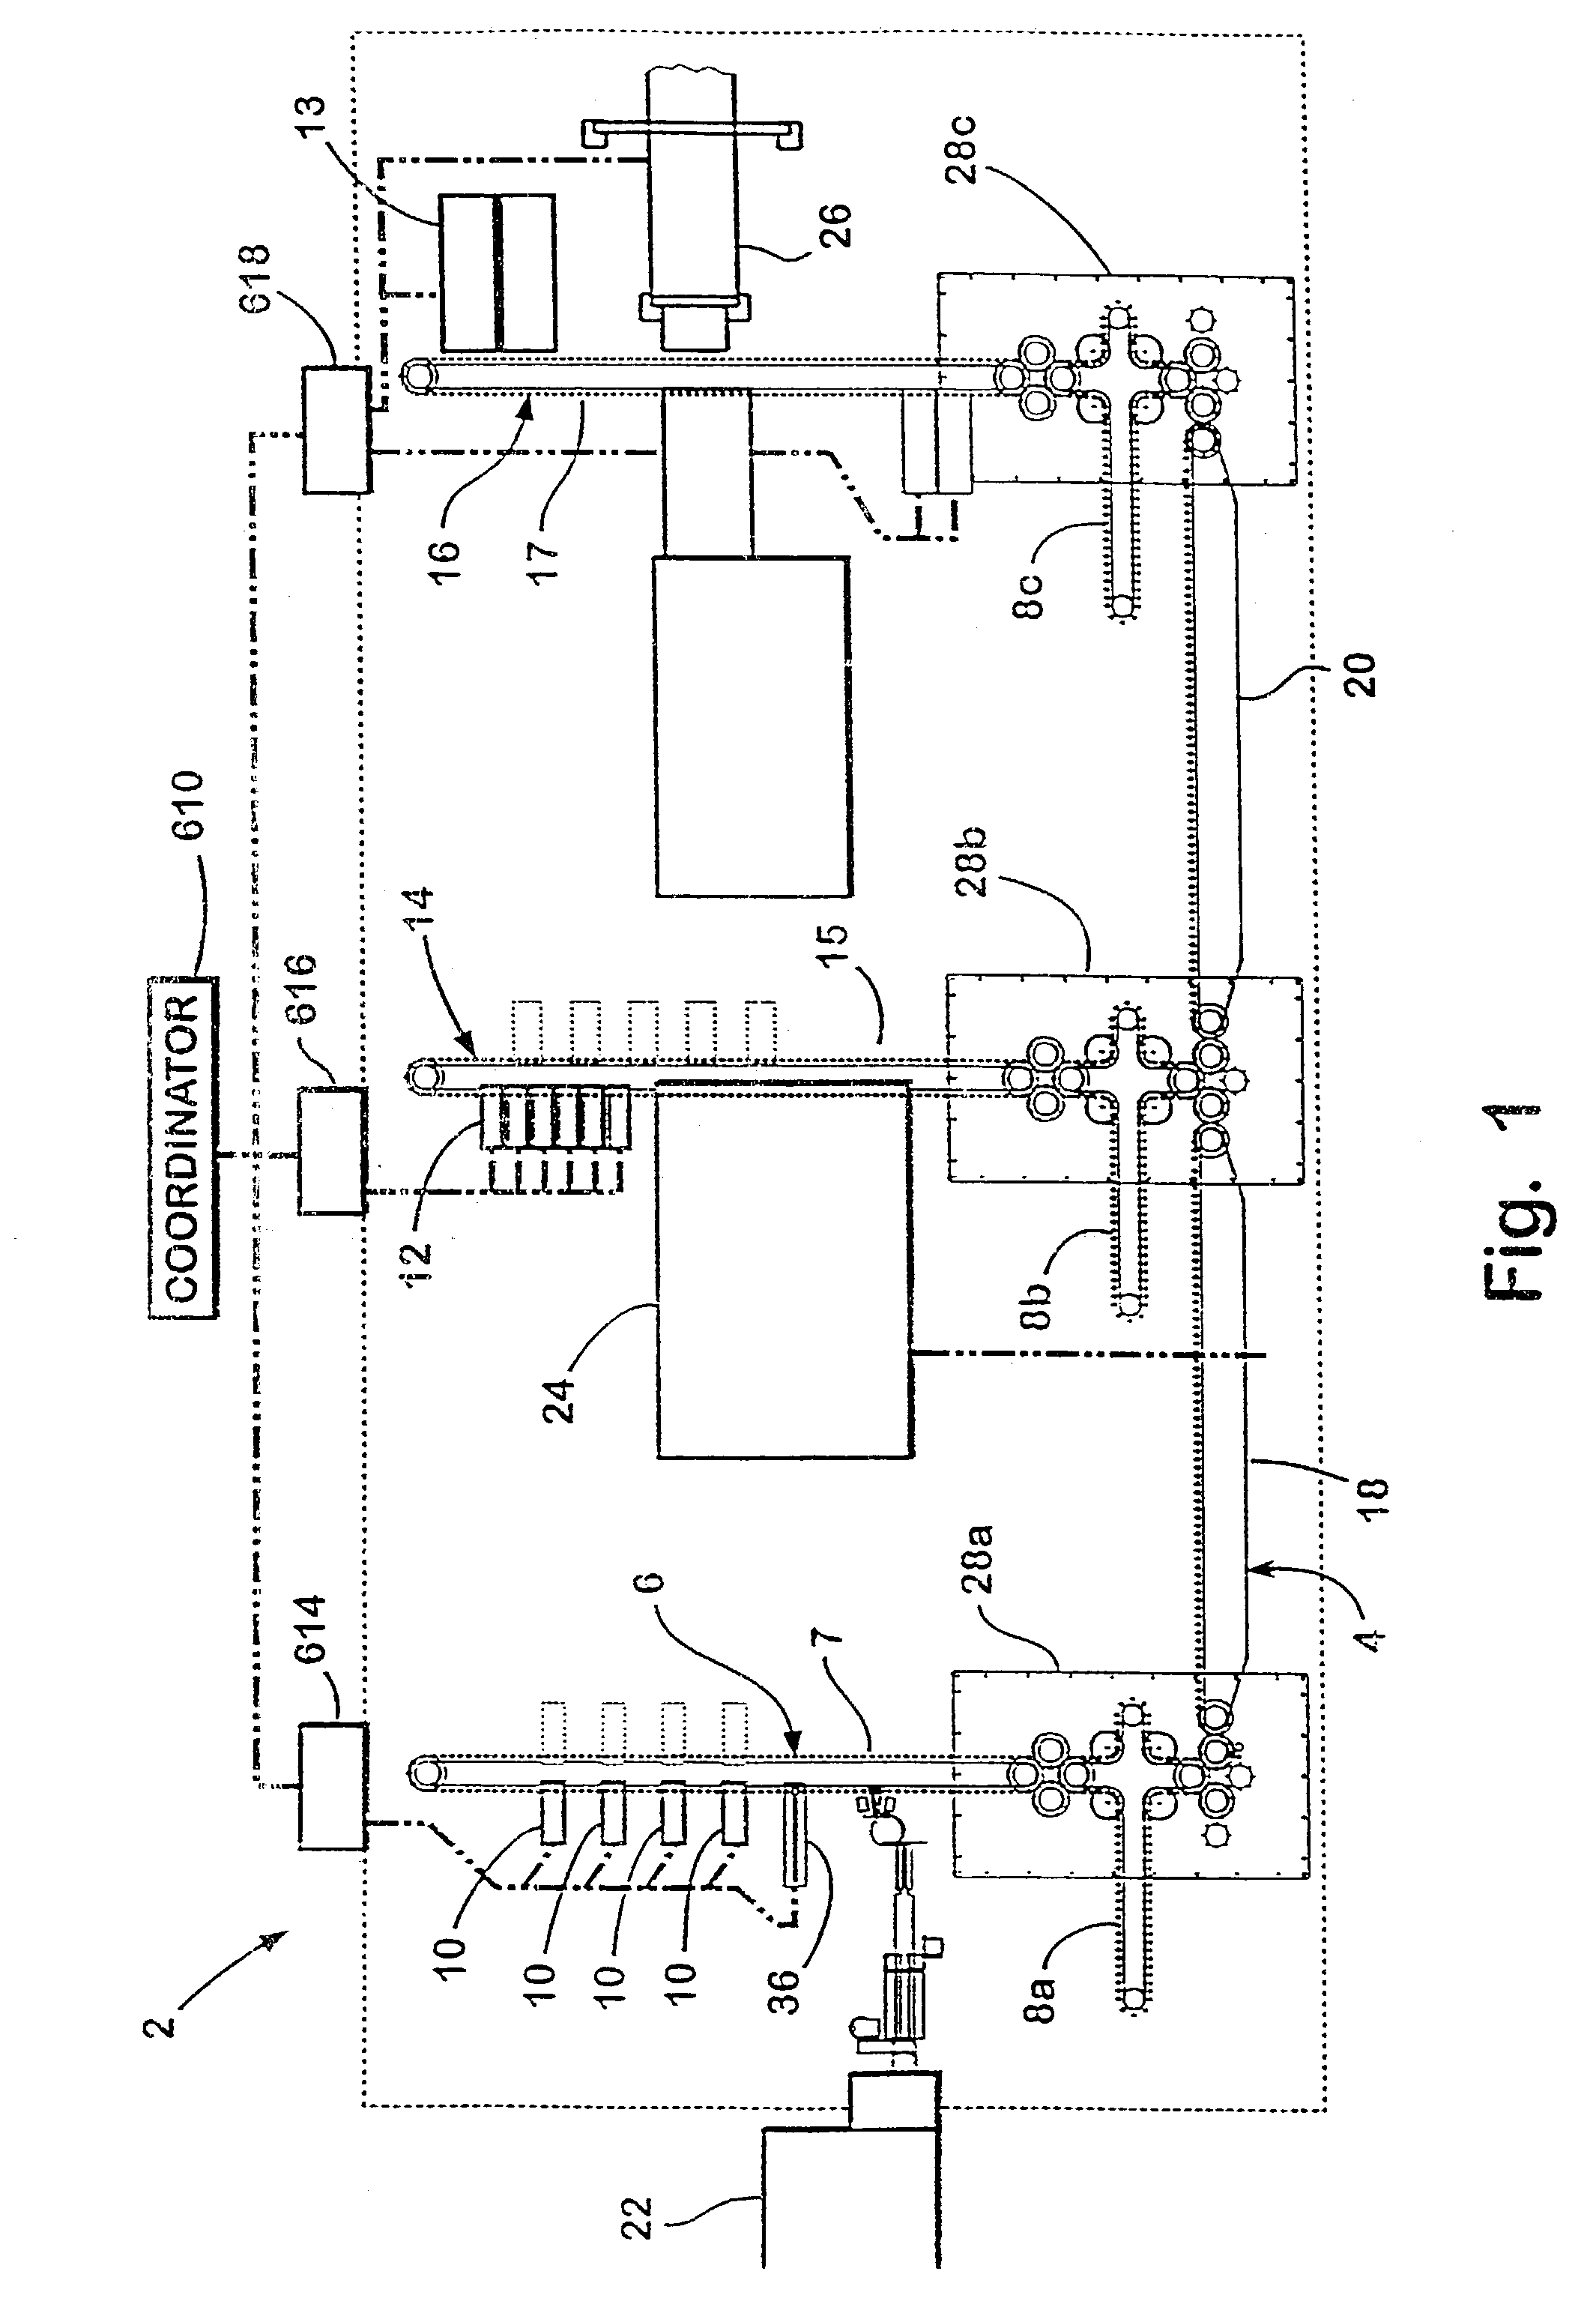 Control system and method therefor